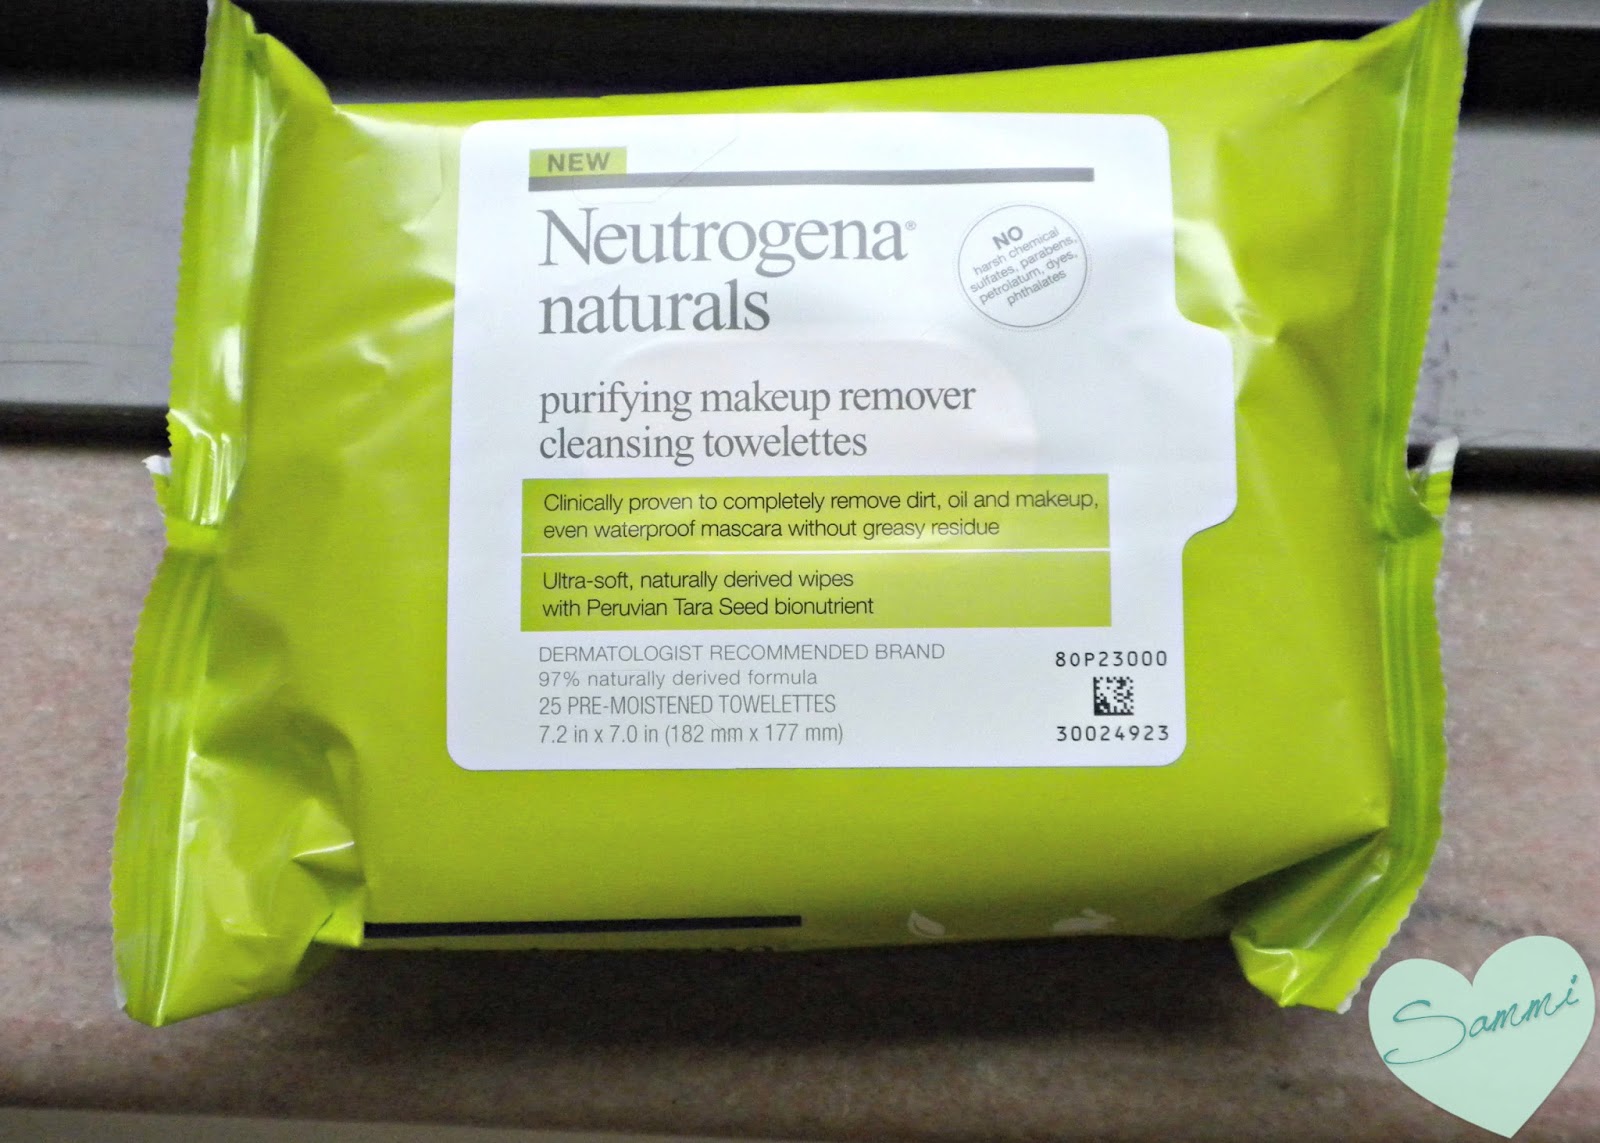 Review: Neutrogena Naturals Purifying Makeup Remover Cleansing Wipes